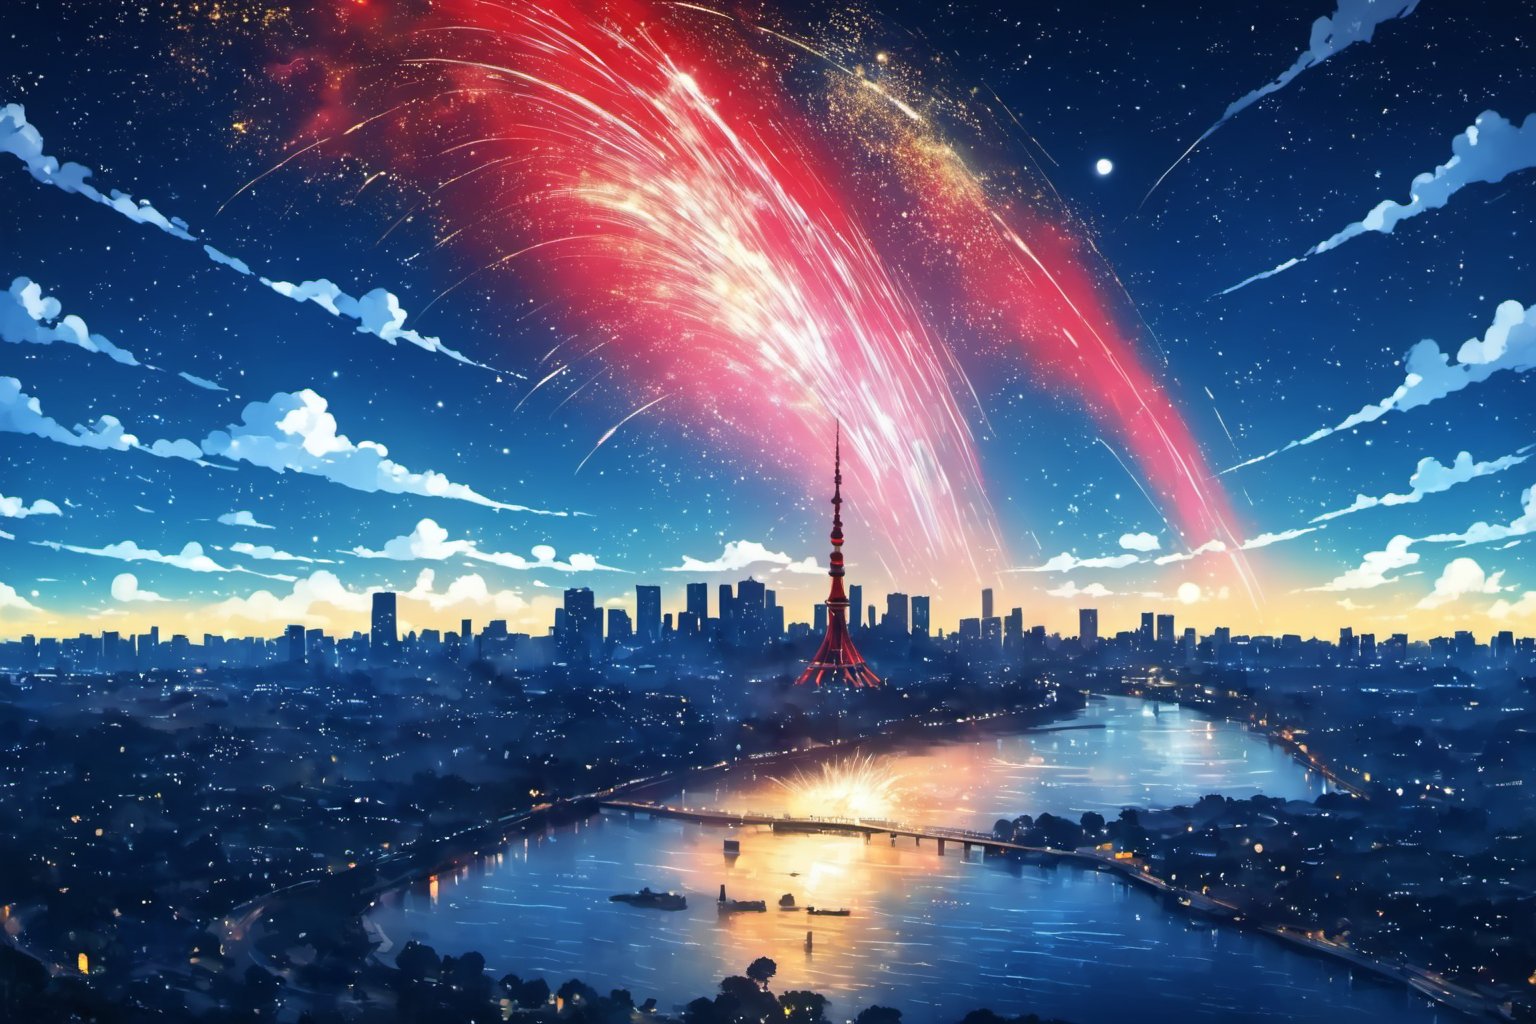 an illustration portraying a sky filled with beautiful meteorites, their radiant trails illuminating the night sky. (8k, best quality, top level: 1.1), cinematic, night, temple, Odaiba Lantern festival, Japanese Lantern festival, red Lantern, flying red Lantern, cinematic background, complex background, dynamic angle, contrast color ((La Sagrada Família)), glow, background, detailed elements below.
Artist Inspiration: Vincent van Gogh
Description: Drawing from van Gogh's expressive style, the illustration captures the meteorites as dynamic elements in the sky. Their vibrant trails dance across the canvas, adding movement and energy. The atmosphere is a blend of artistic interpretation and the fascination of cosmic phenomena. --v 5 --stylize 1000, cinematics, 4k, cinematics, best lighting, best perspective, best composition, ,no_humans,EpicSky,LODBG,lty,cloud,ink scenery